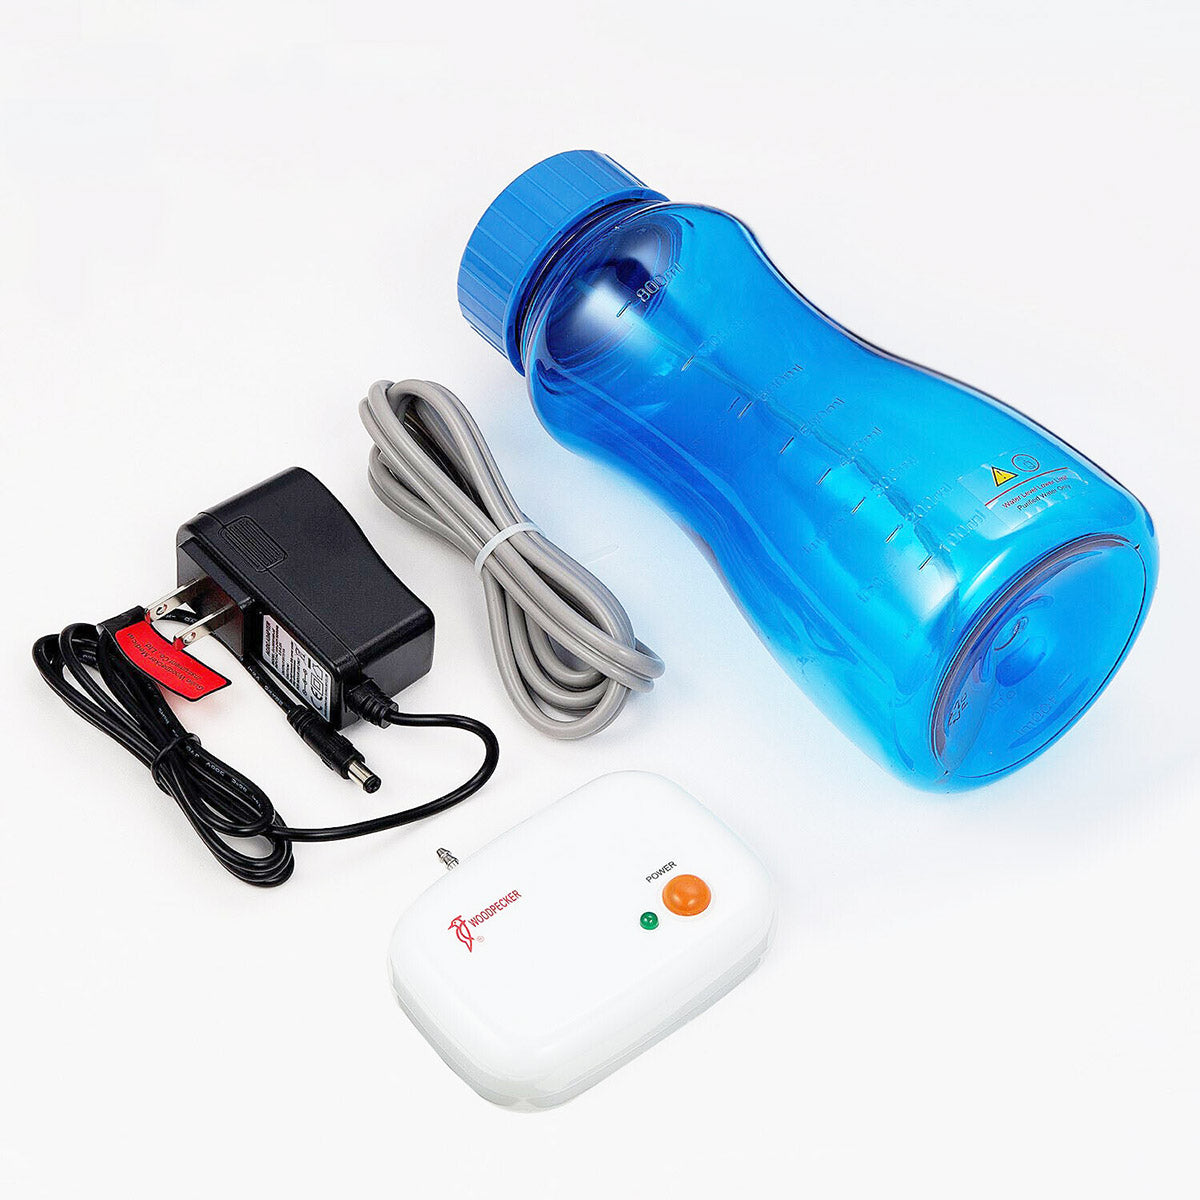 Woodpecker AT-1 Auto Water Bottle Supply System - pairaydental.com